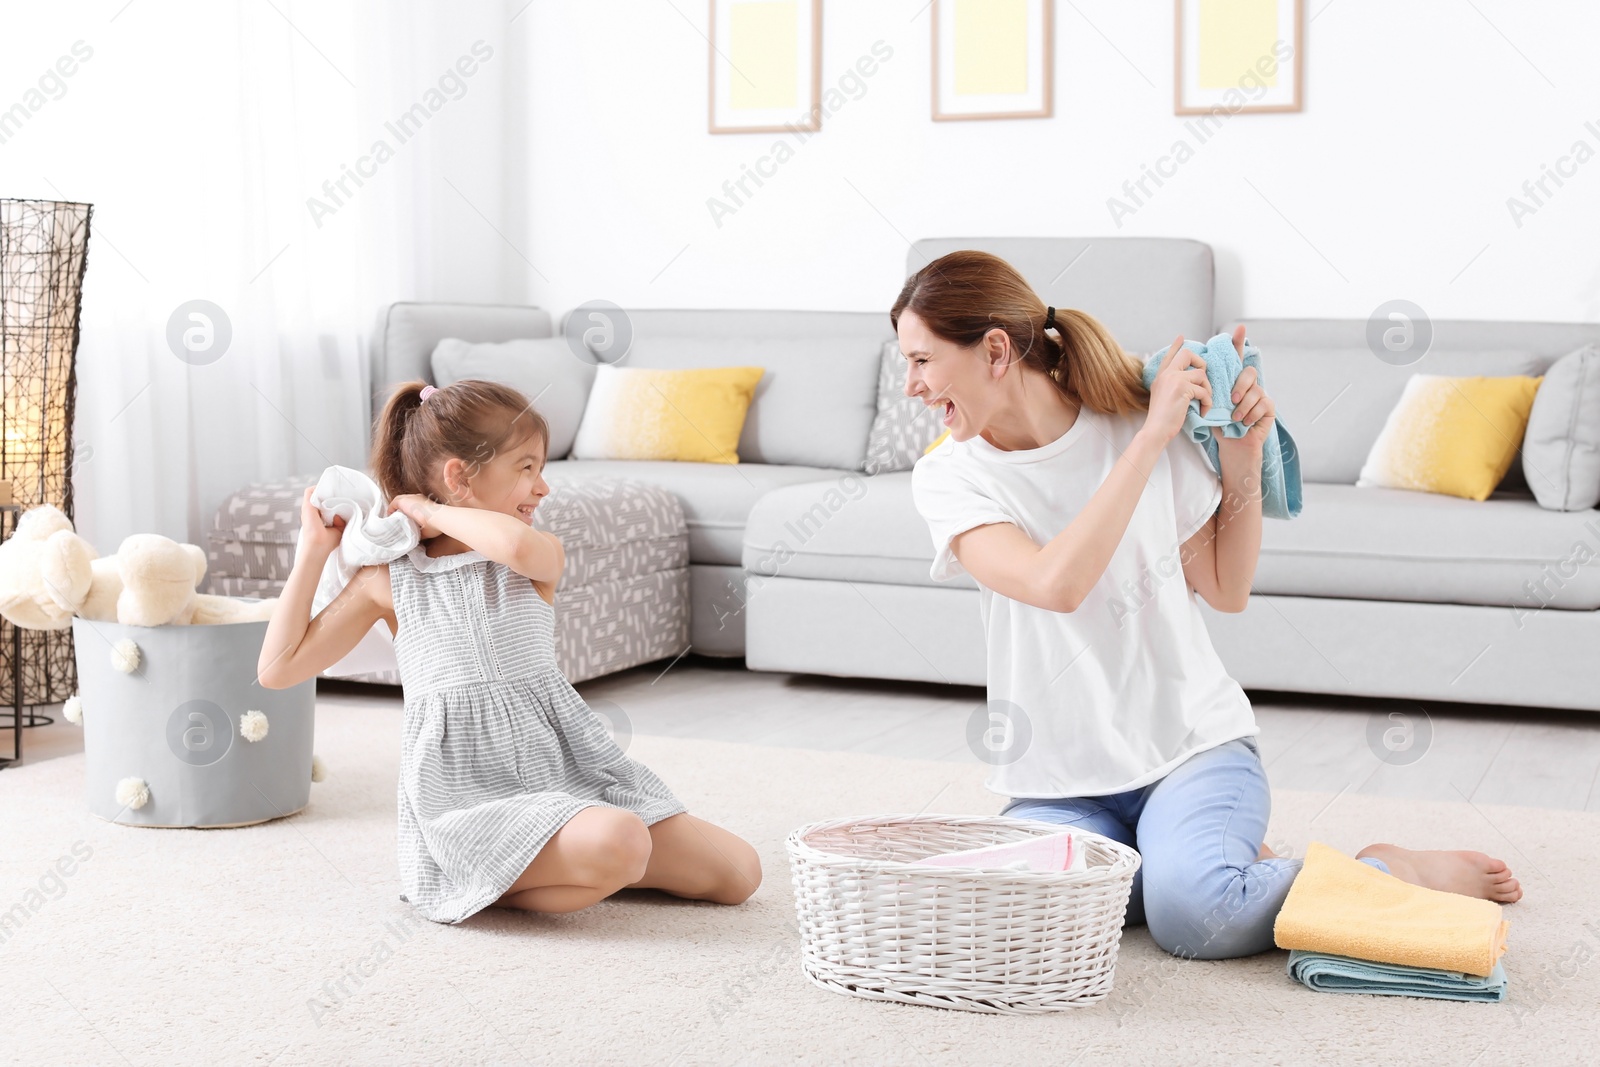 Photo of Housewife and daughter having fun while folding freshly washed towels in room